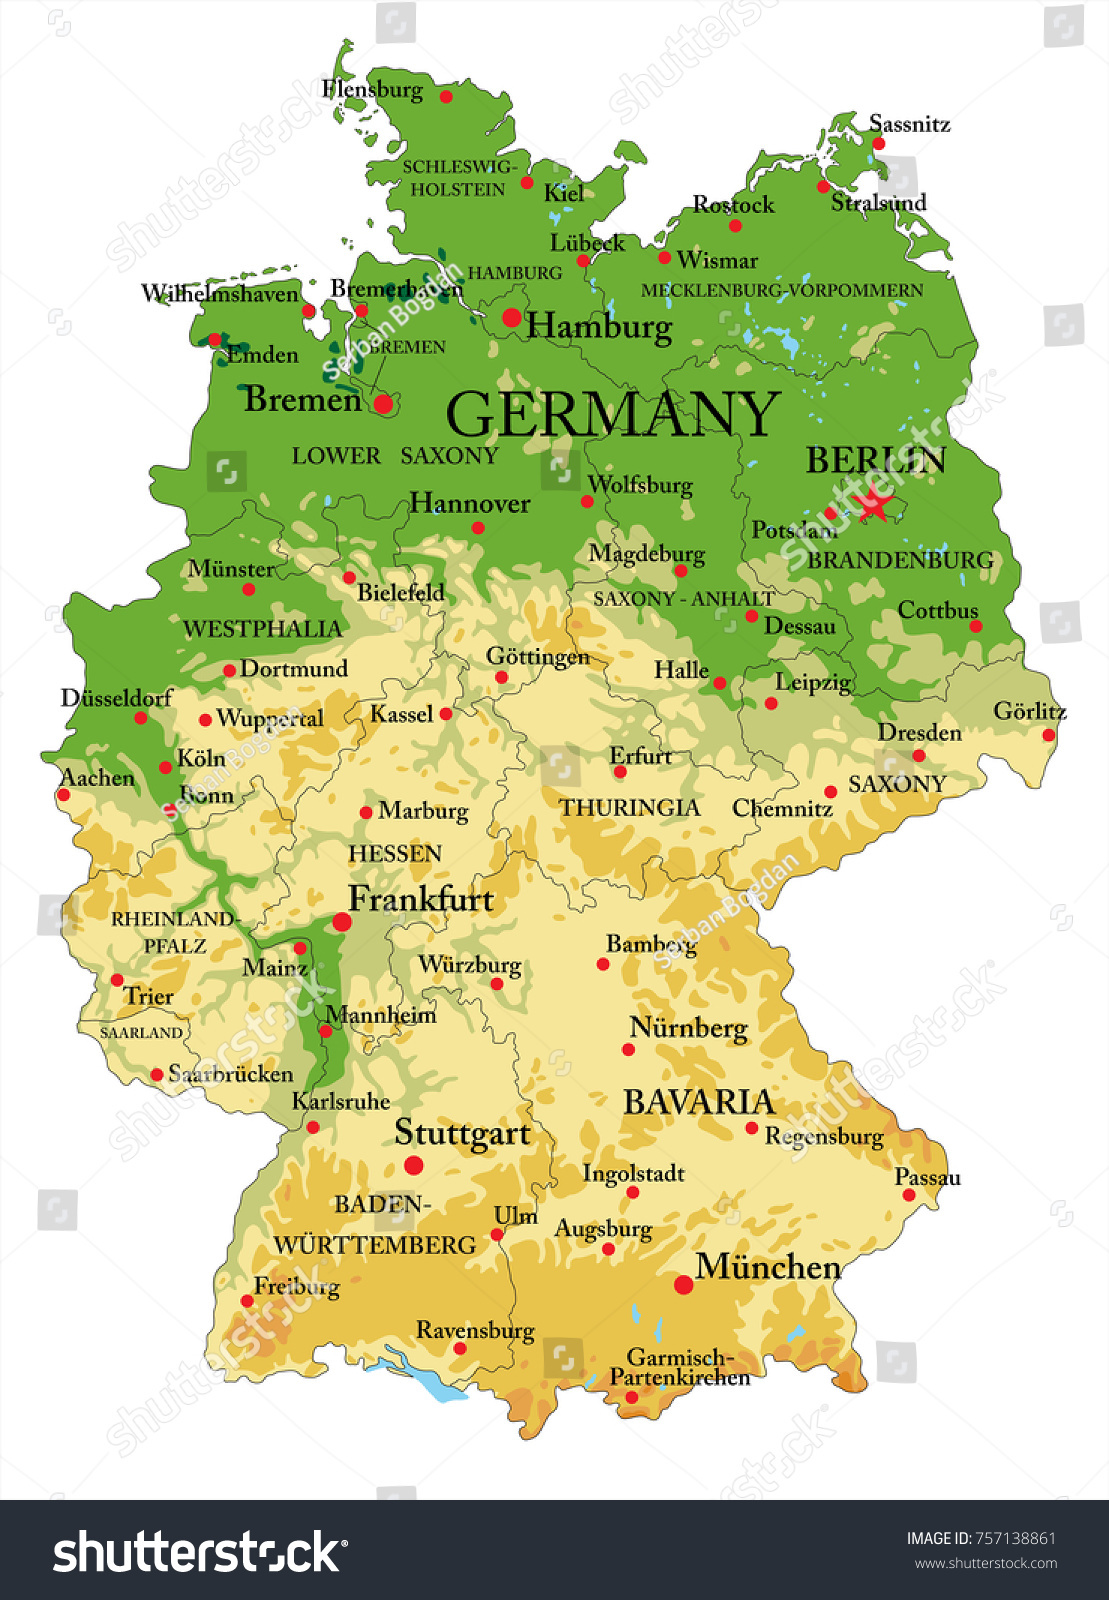 SVG of Germany physical map svg